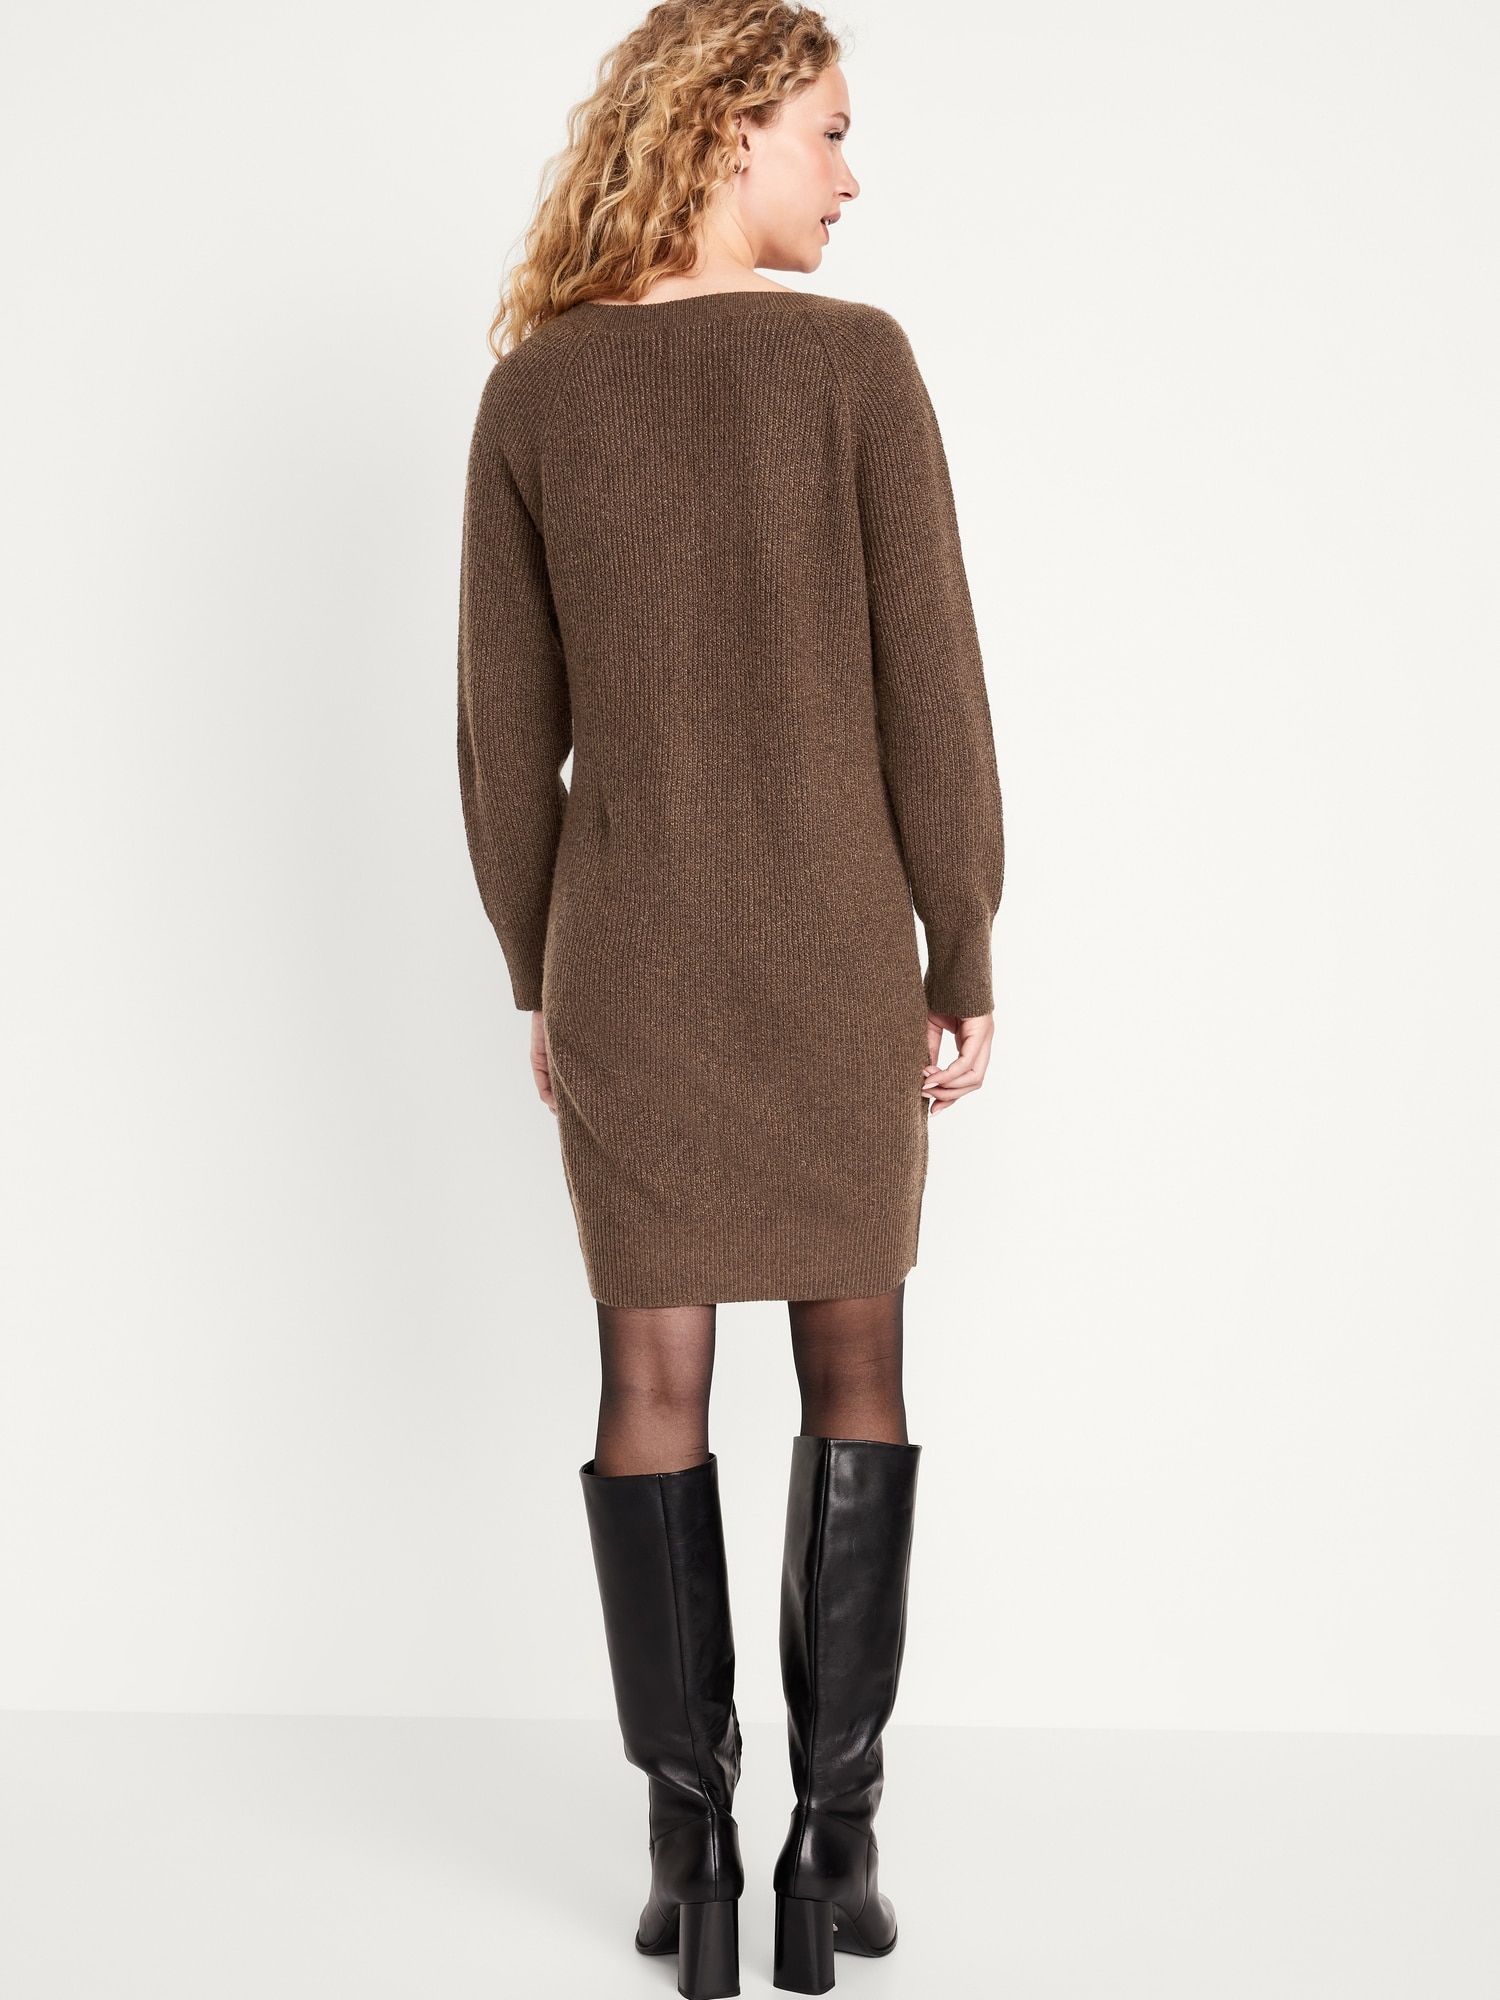 J.Jill - It's that sweater-dresses-and-boots-time-of-year